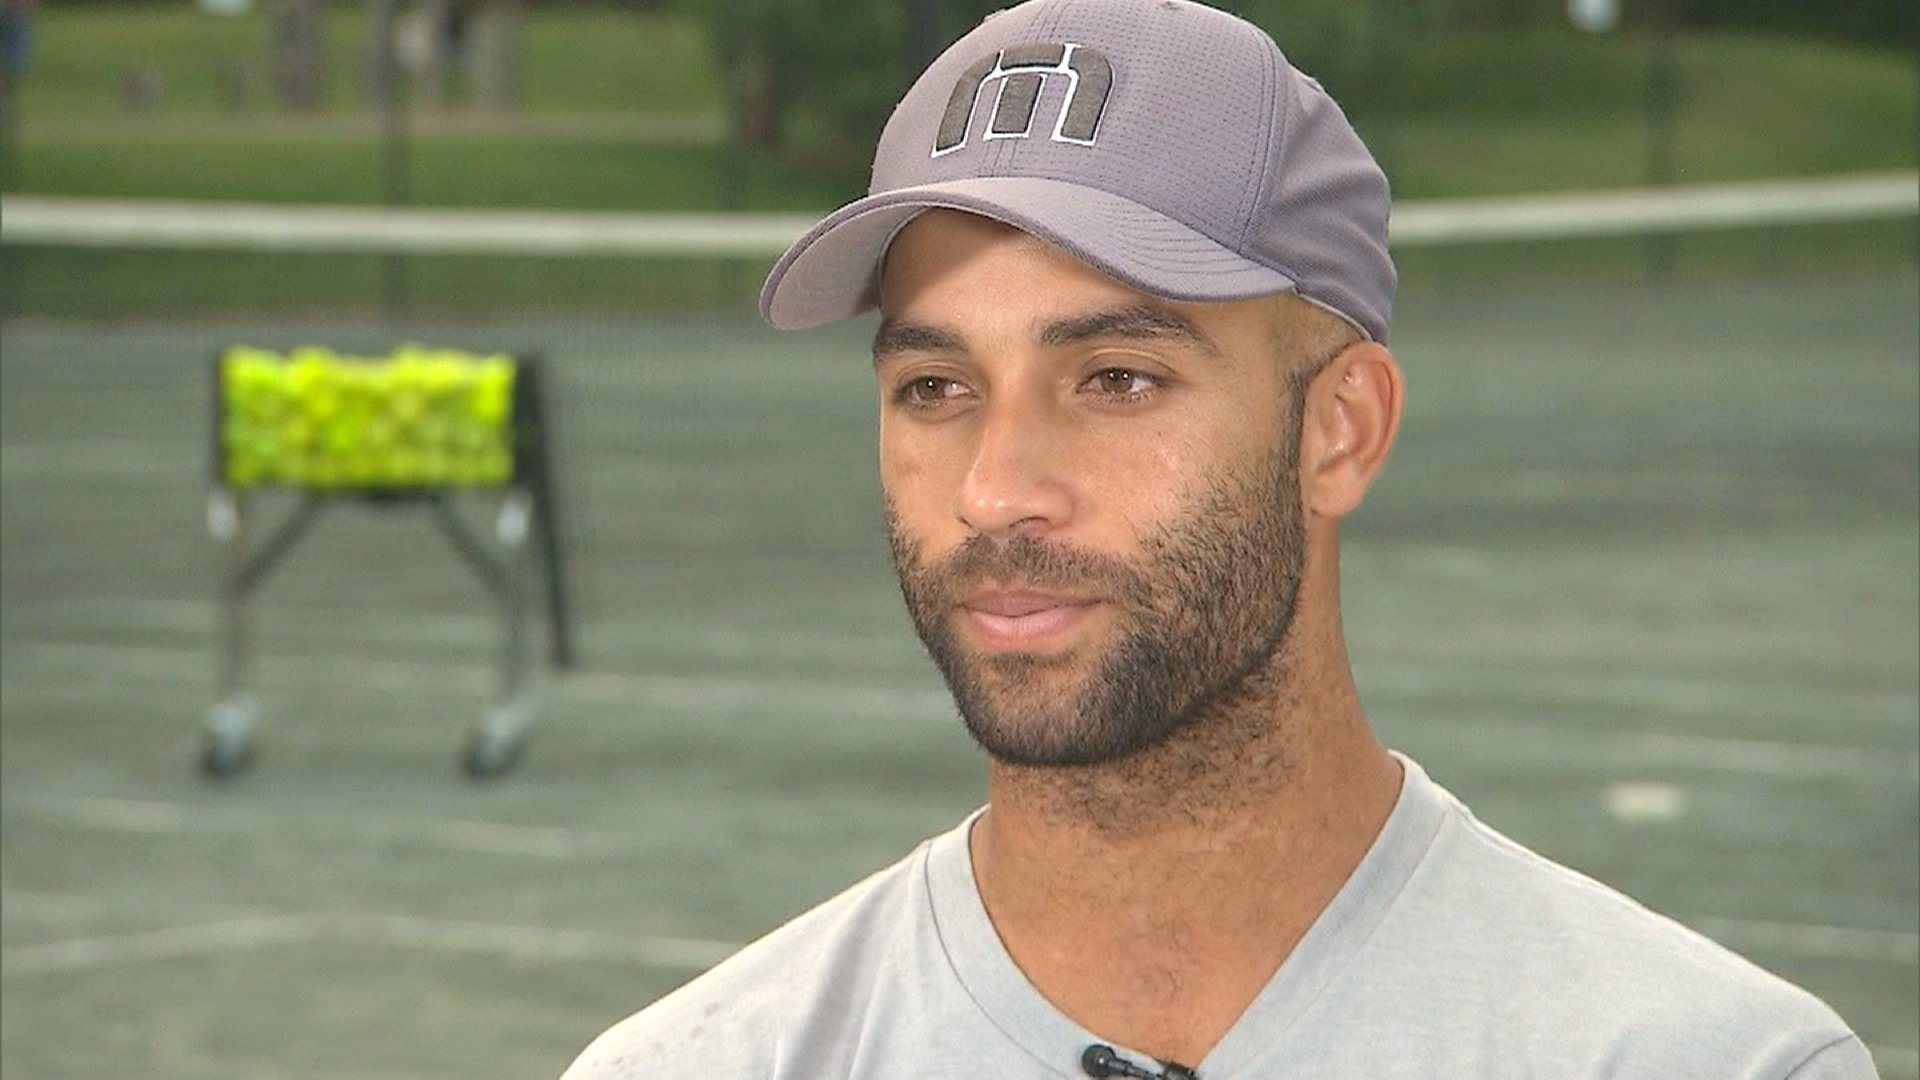 Plainclothes NYPD officer James Frascatore tackled former tennis star James Blake on Wednesday, September 9, 2015. Blake was waiting for a car to pick him up and take him to the U.S. Open tennis tournament outside the Grand Hyatt in Manhattan when tackled.